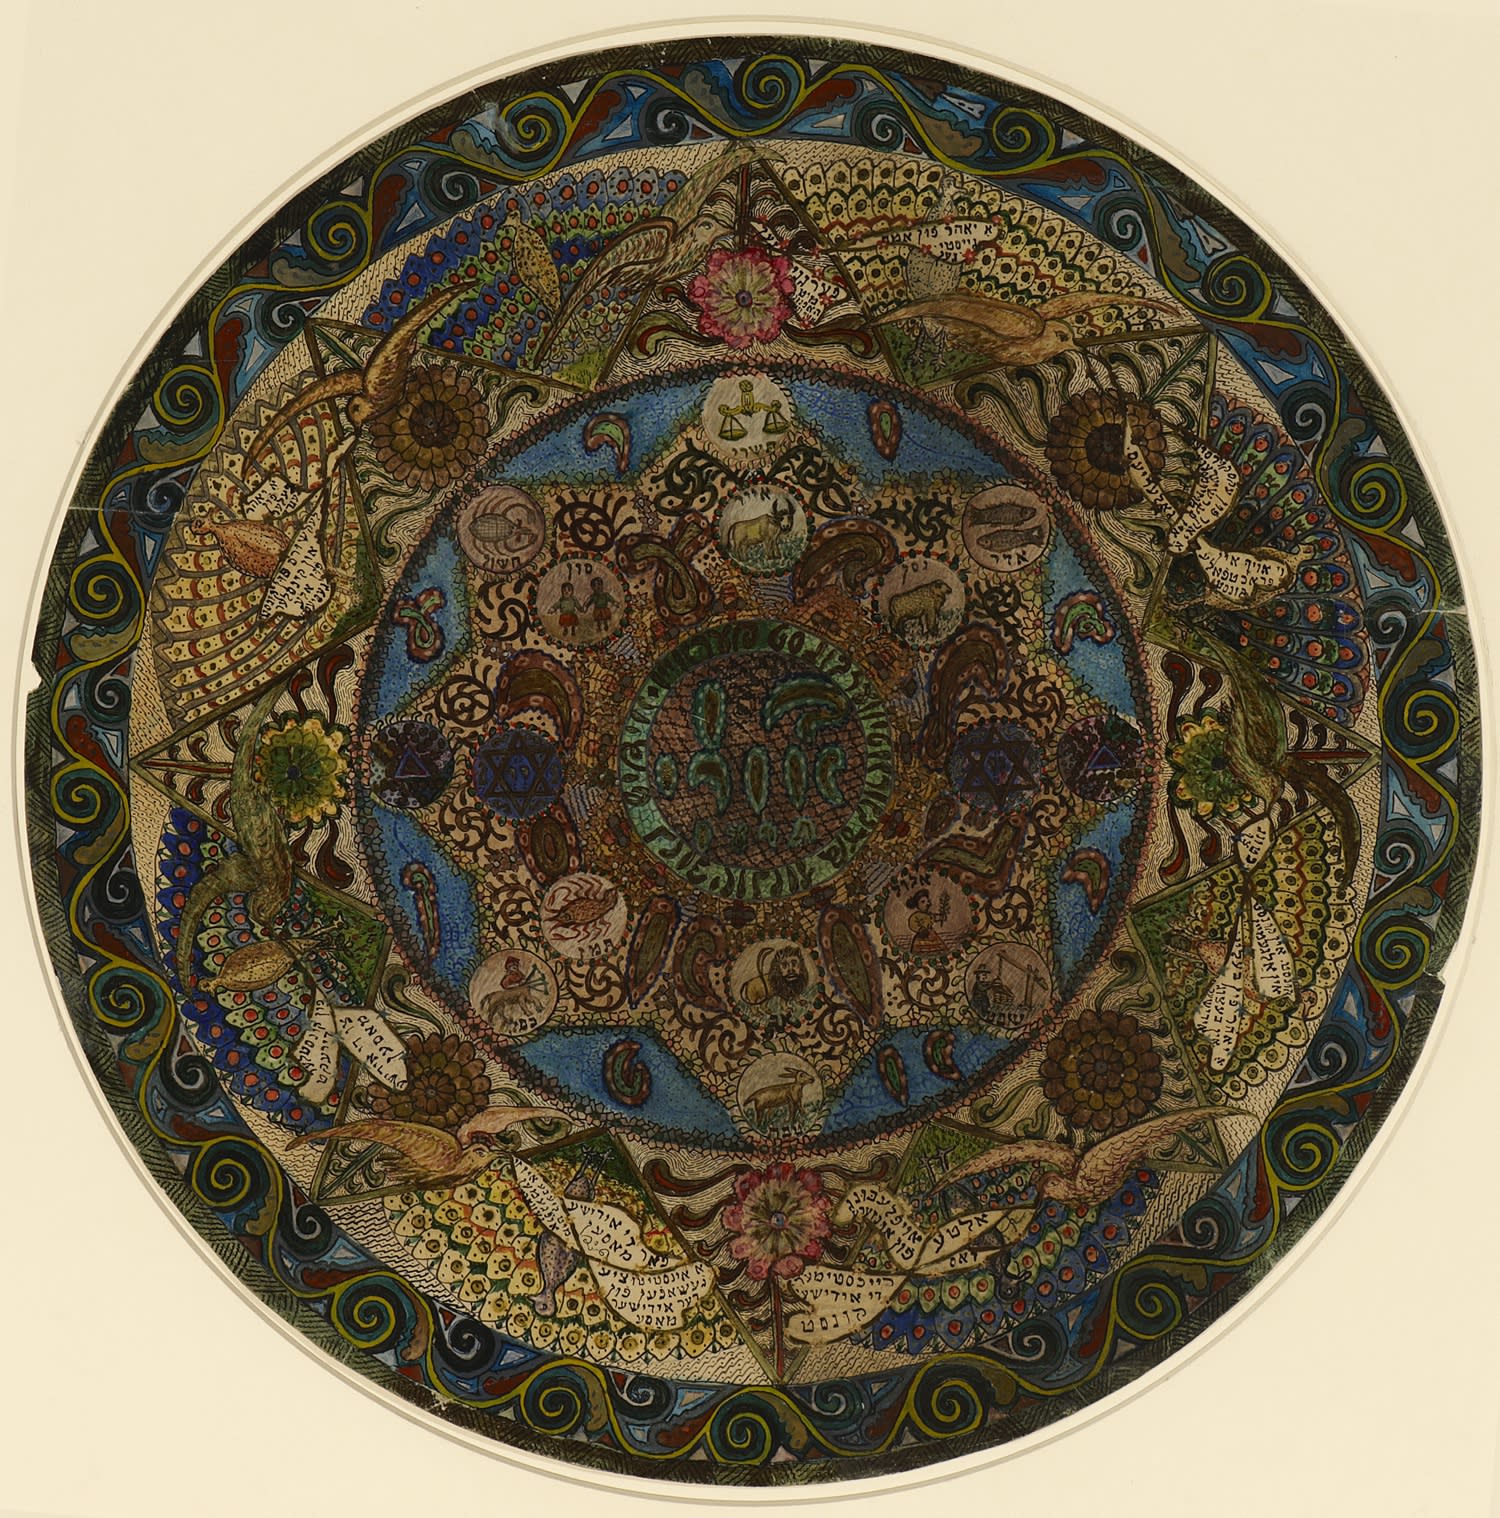 Lazar Berson (1882-1954) Circular Design for Ben Uri Art Society c.1915 Coloured inks on paper 44 x 44 cm Ben Uri Collection © Lazar Berson estate To see and discover more about this artist click here